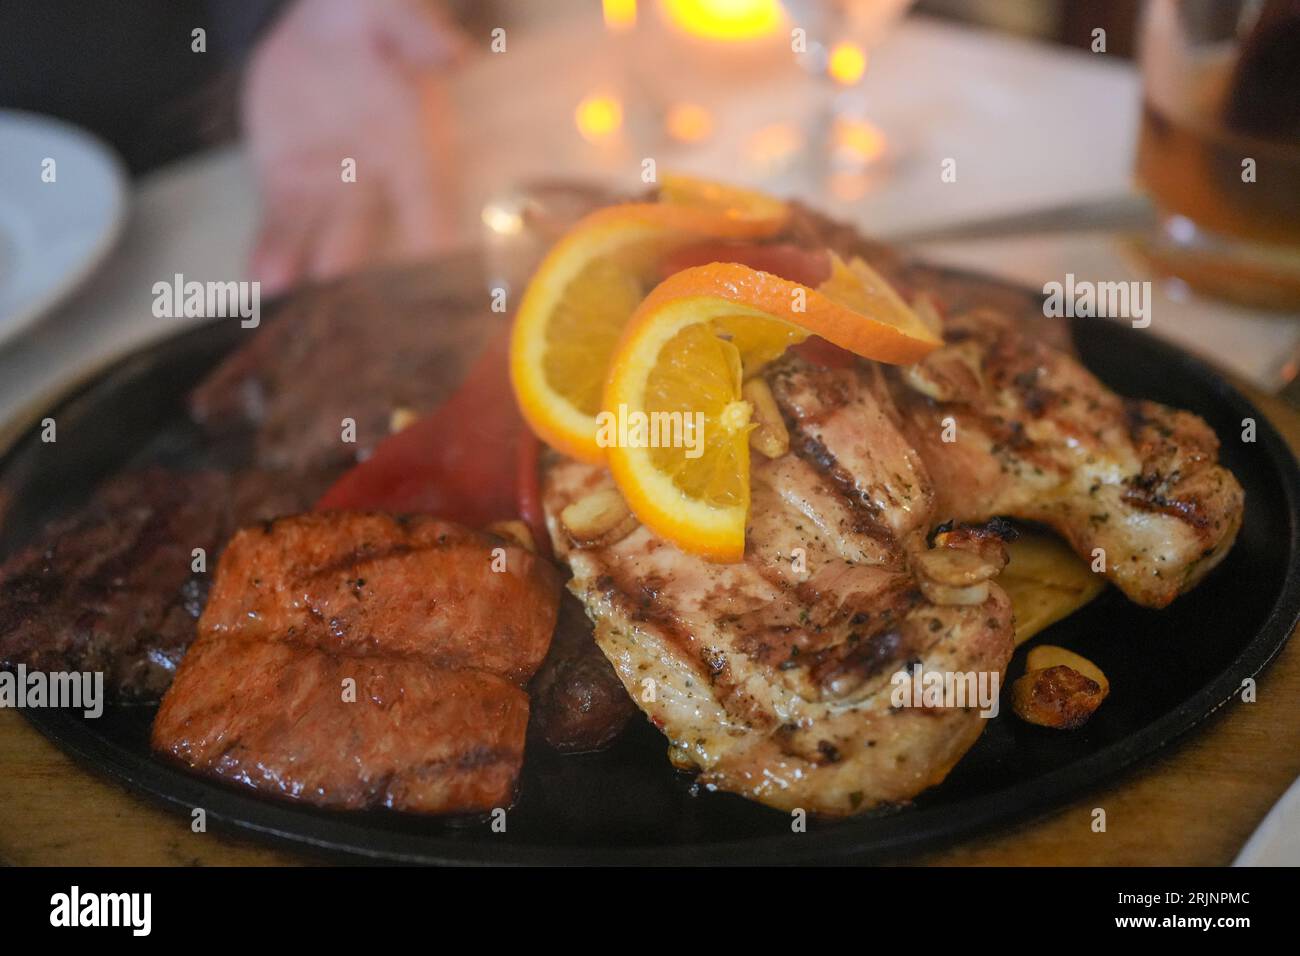 A black plate with a variety of savory meats and slices of orange arranged artfully. Stock Photo